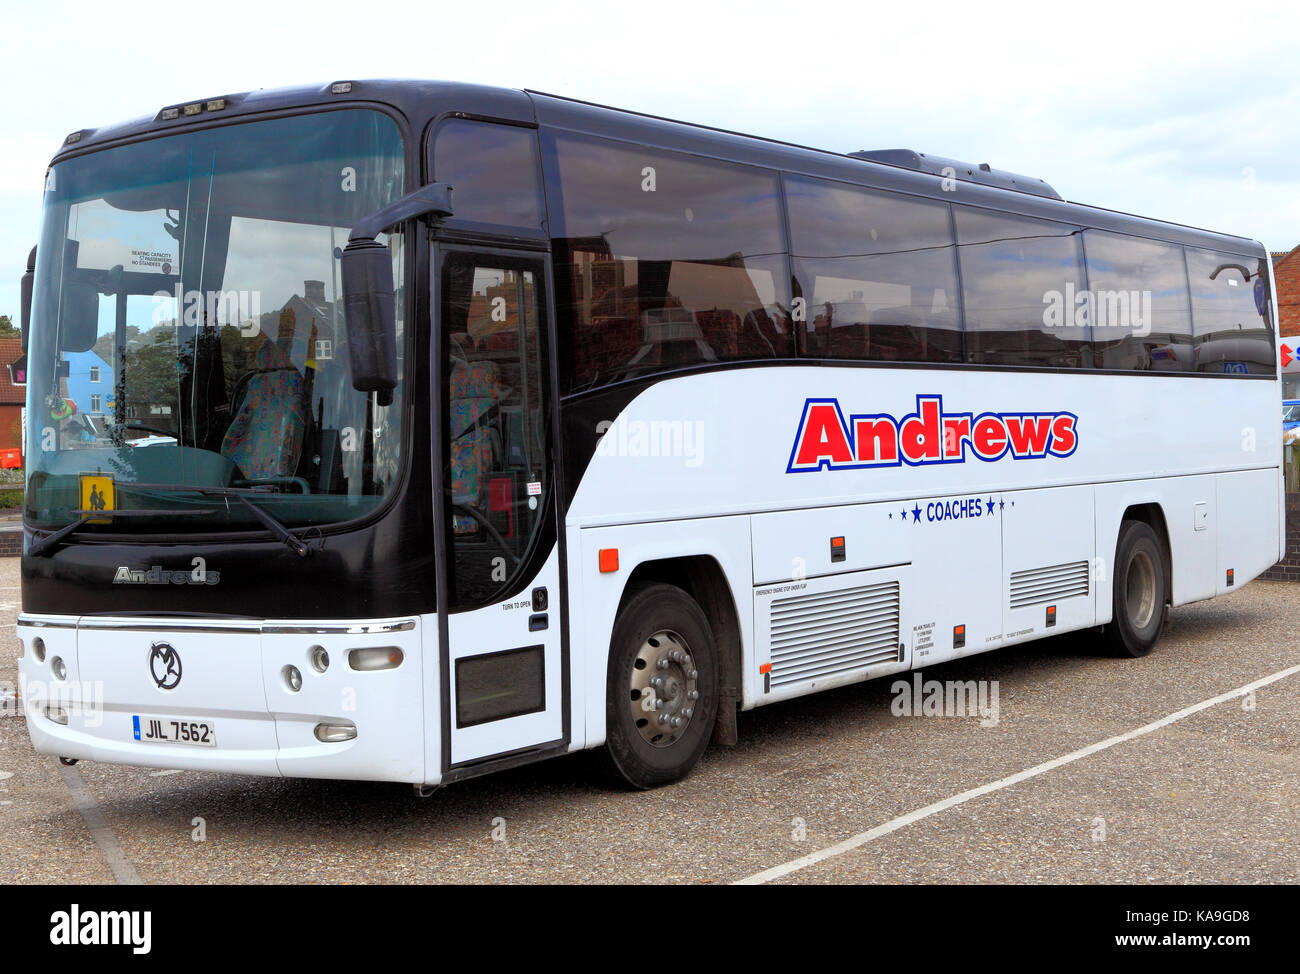 Andrews Coaches, coach, day trips, trip, excursion, excursions, holiday, holidays, travel company, companies, bus, transport, England, UK Stock Photo